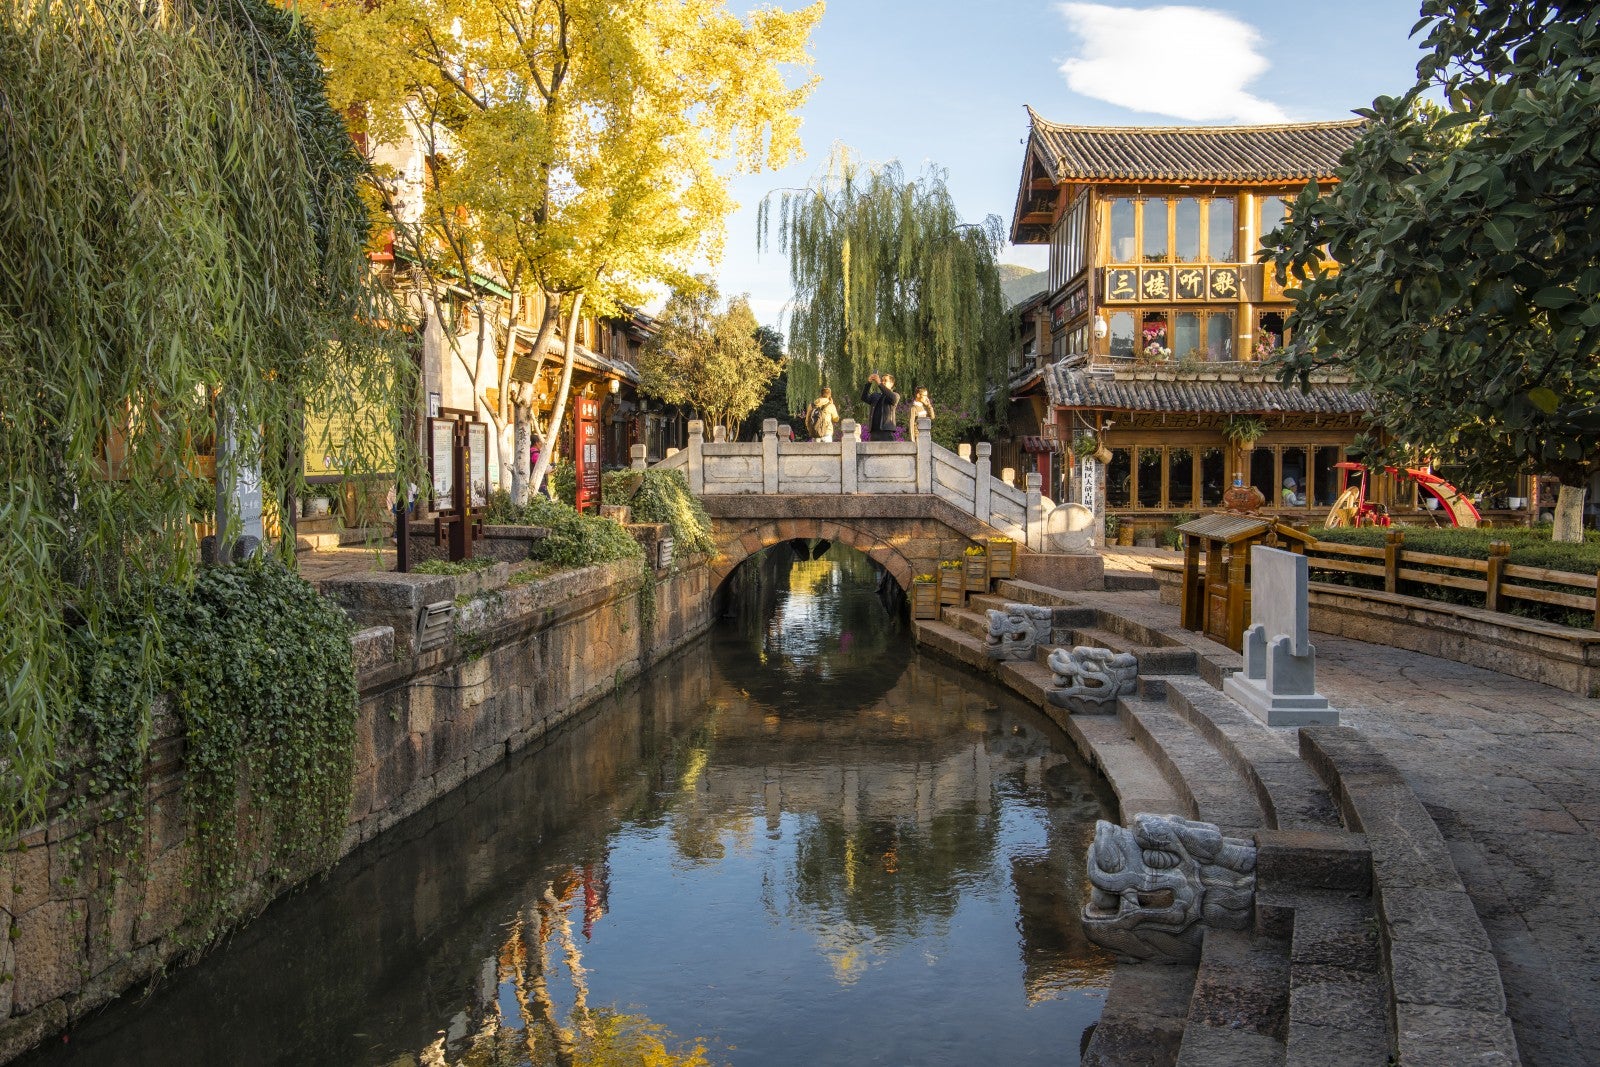 [TEST] Never Thought of Travelling to Kunming, China? These 6 Spots Might Change Your Mind - WORLD OF BUZZ